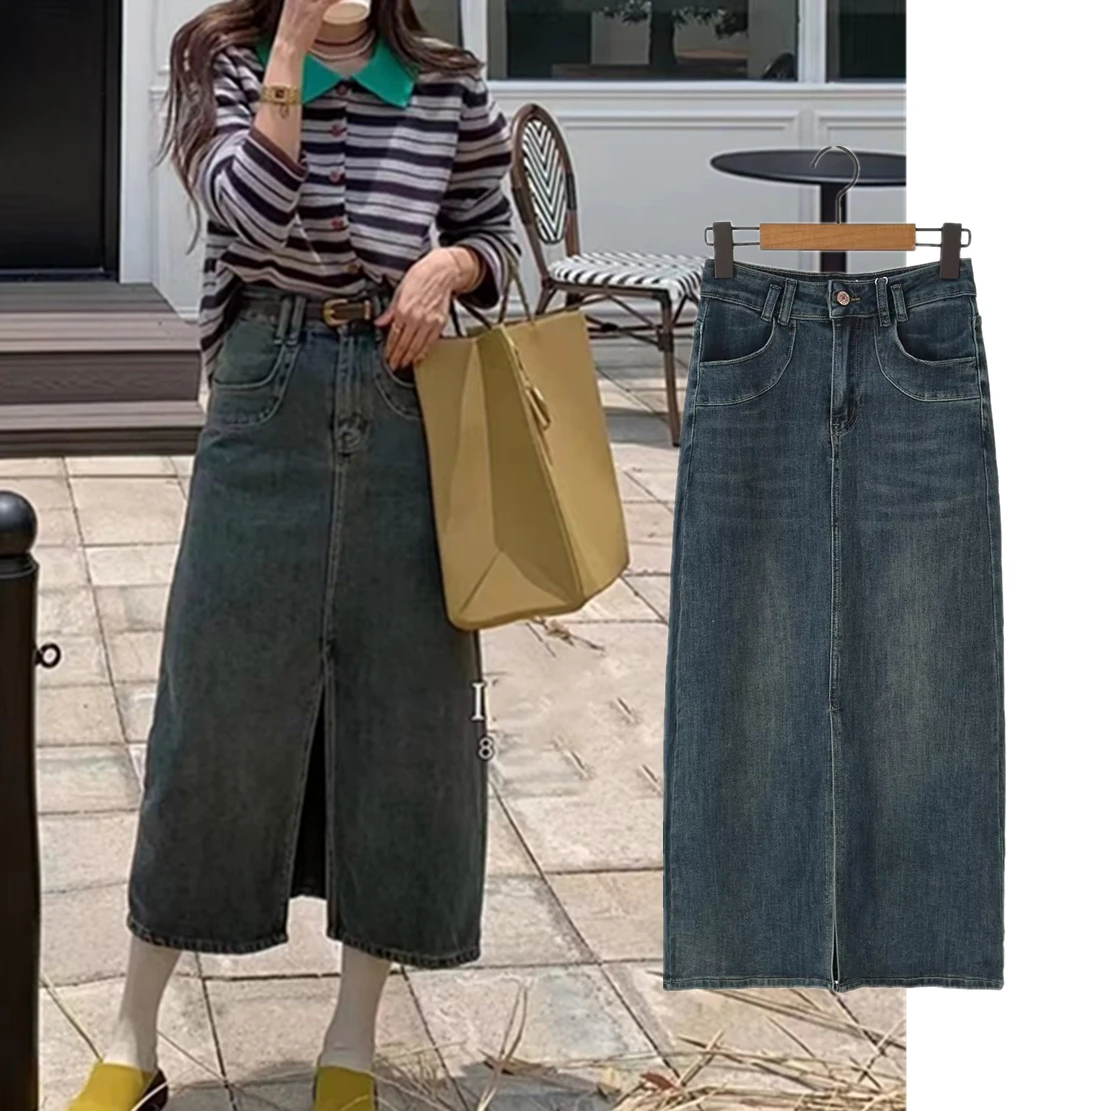 Withered Ins Fashion Blogger High Street Slit Denim Skirt High Waist Retro Washed Old Straight Midi Skirt Female european country street scenery shower curtain bathroom set spring red pink flower retro garden wall decor hanging curtains